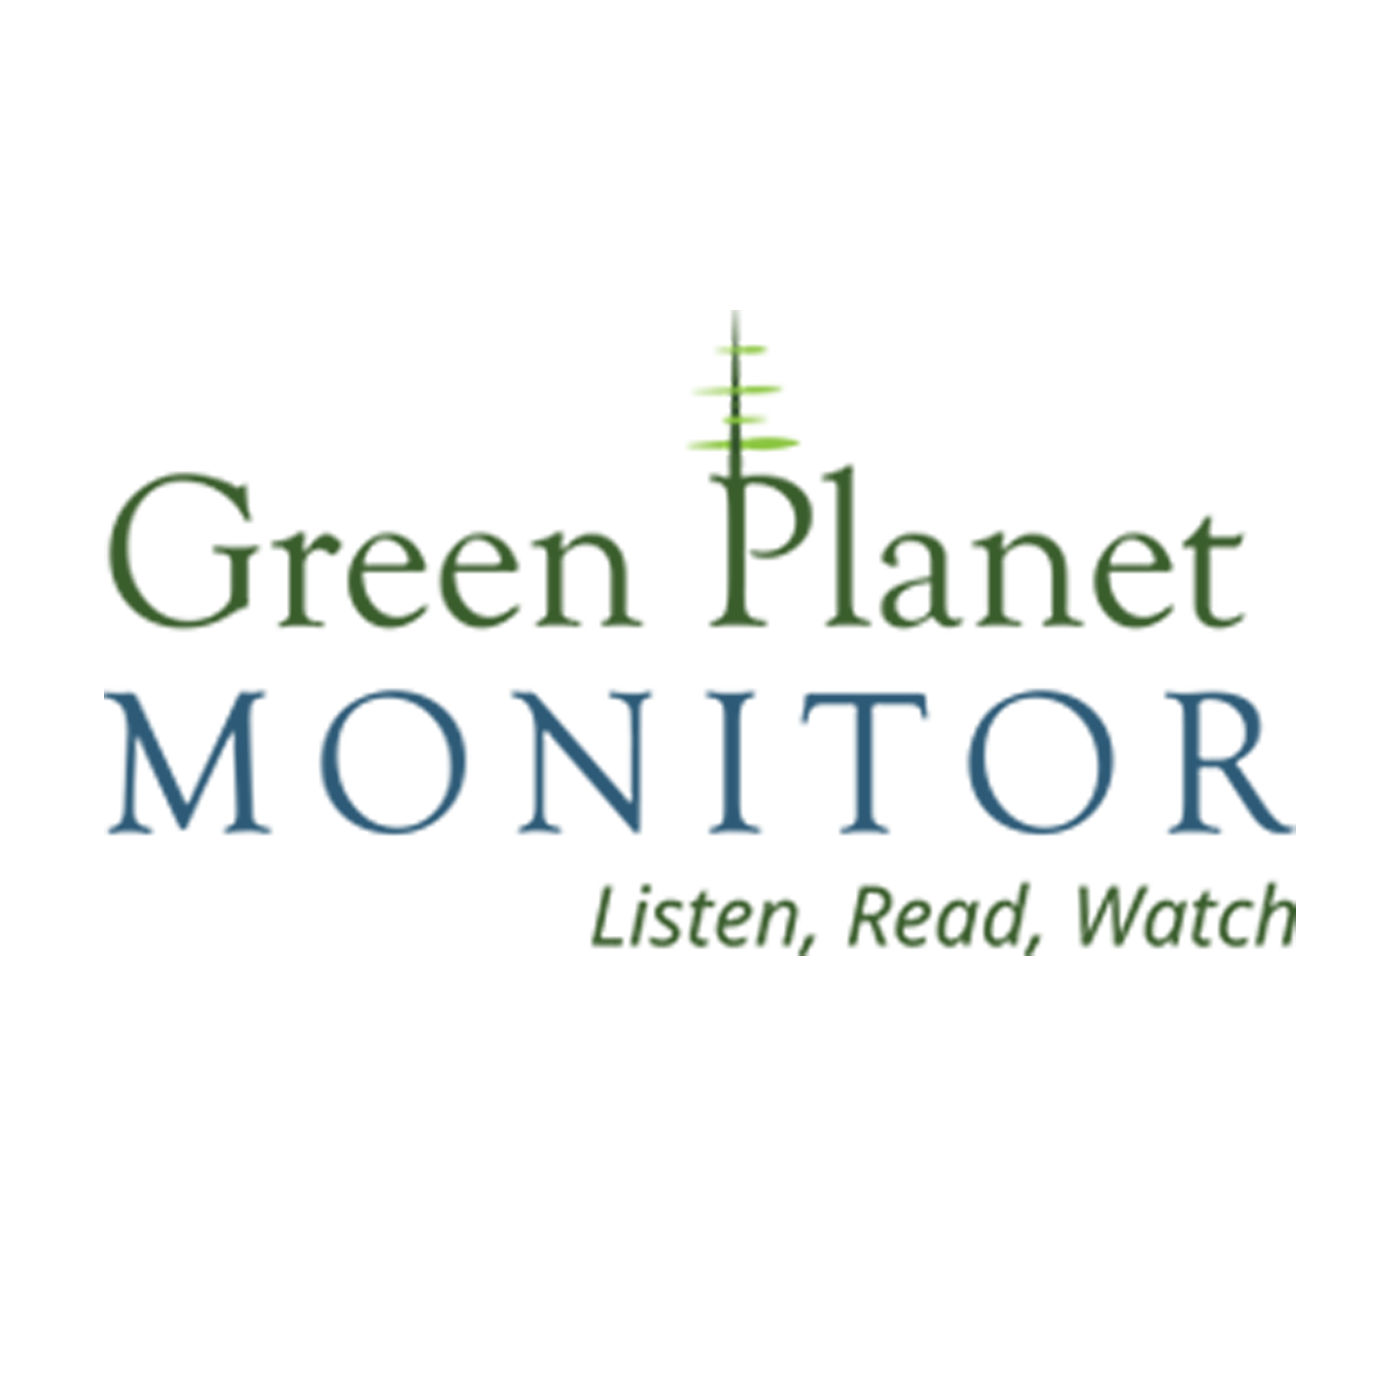 The Green Planet Monitor podcast